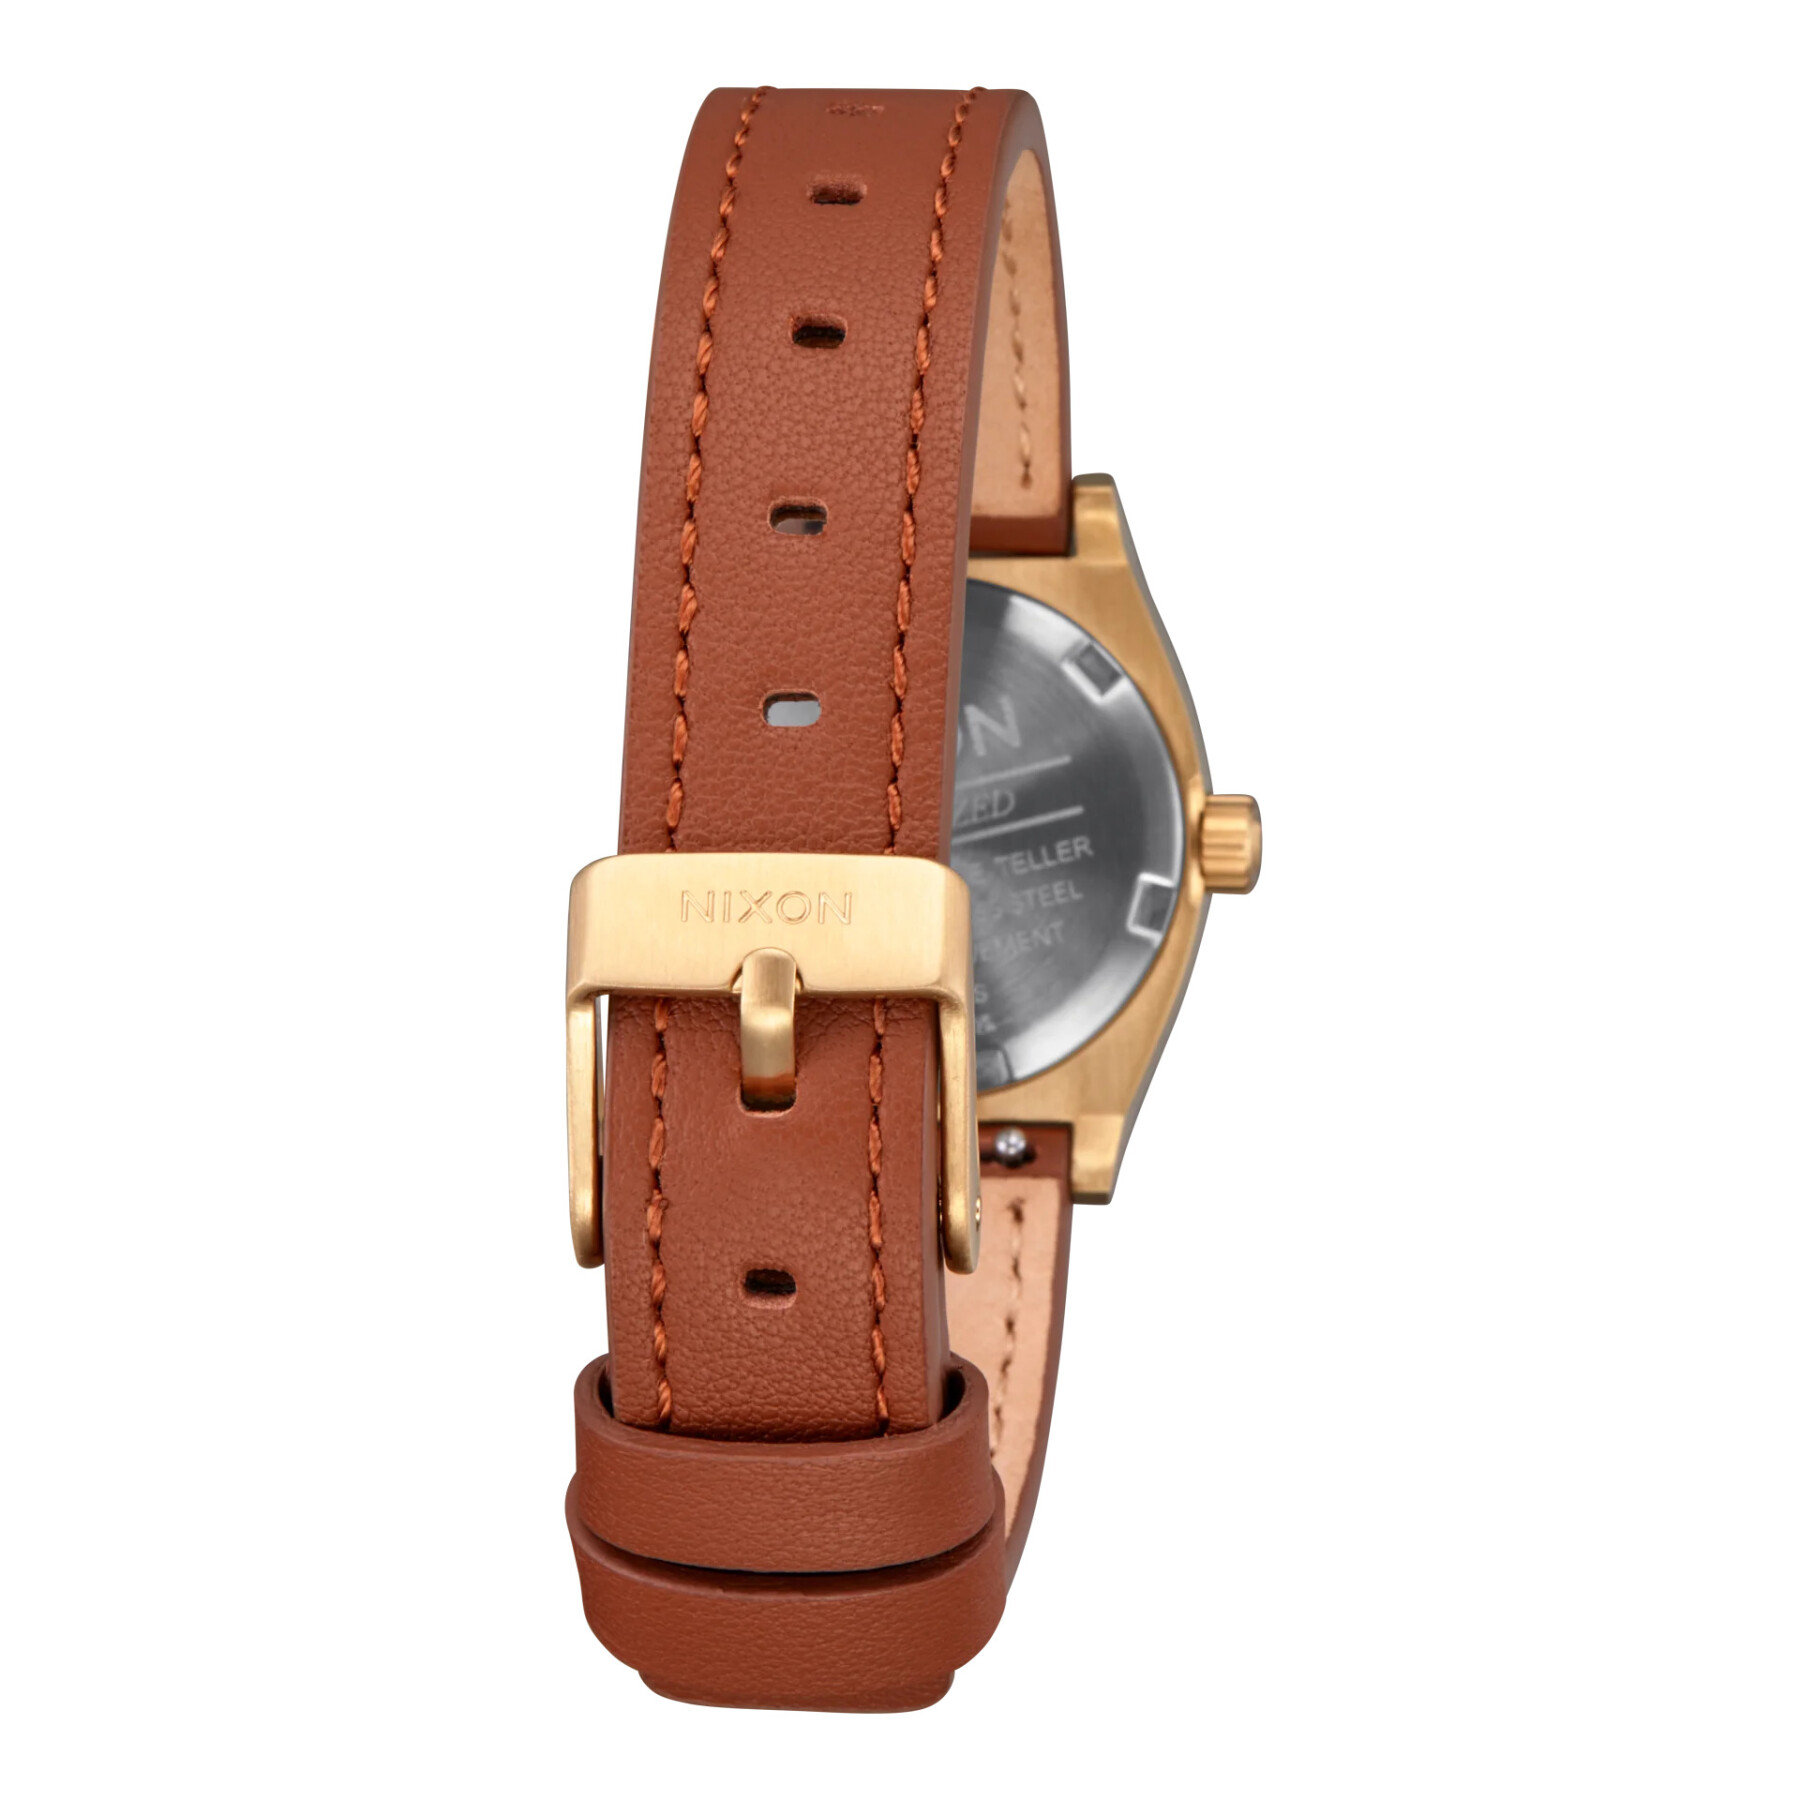 Montre femme Nixon Small Time Teller Leather